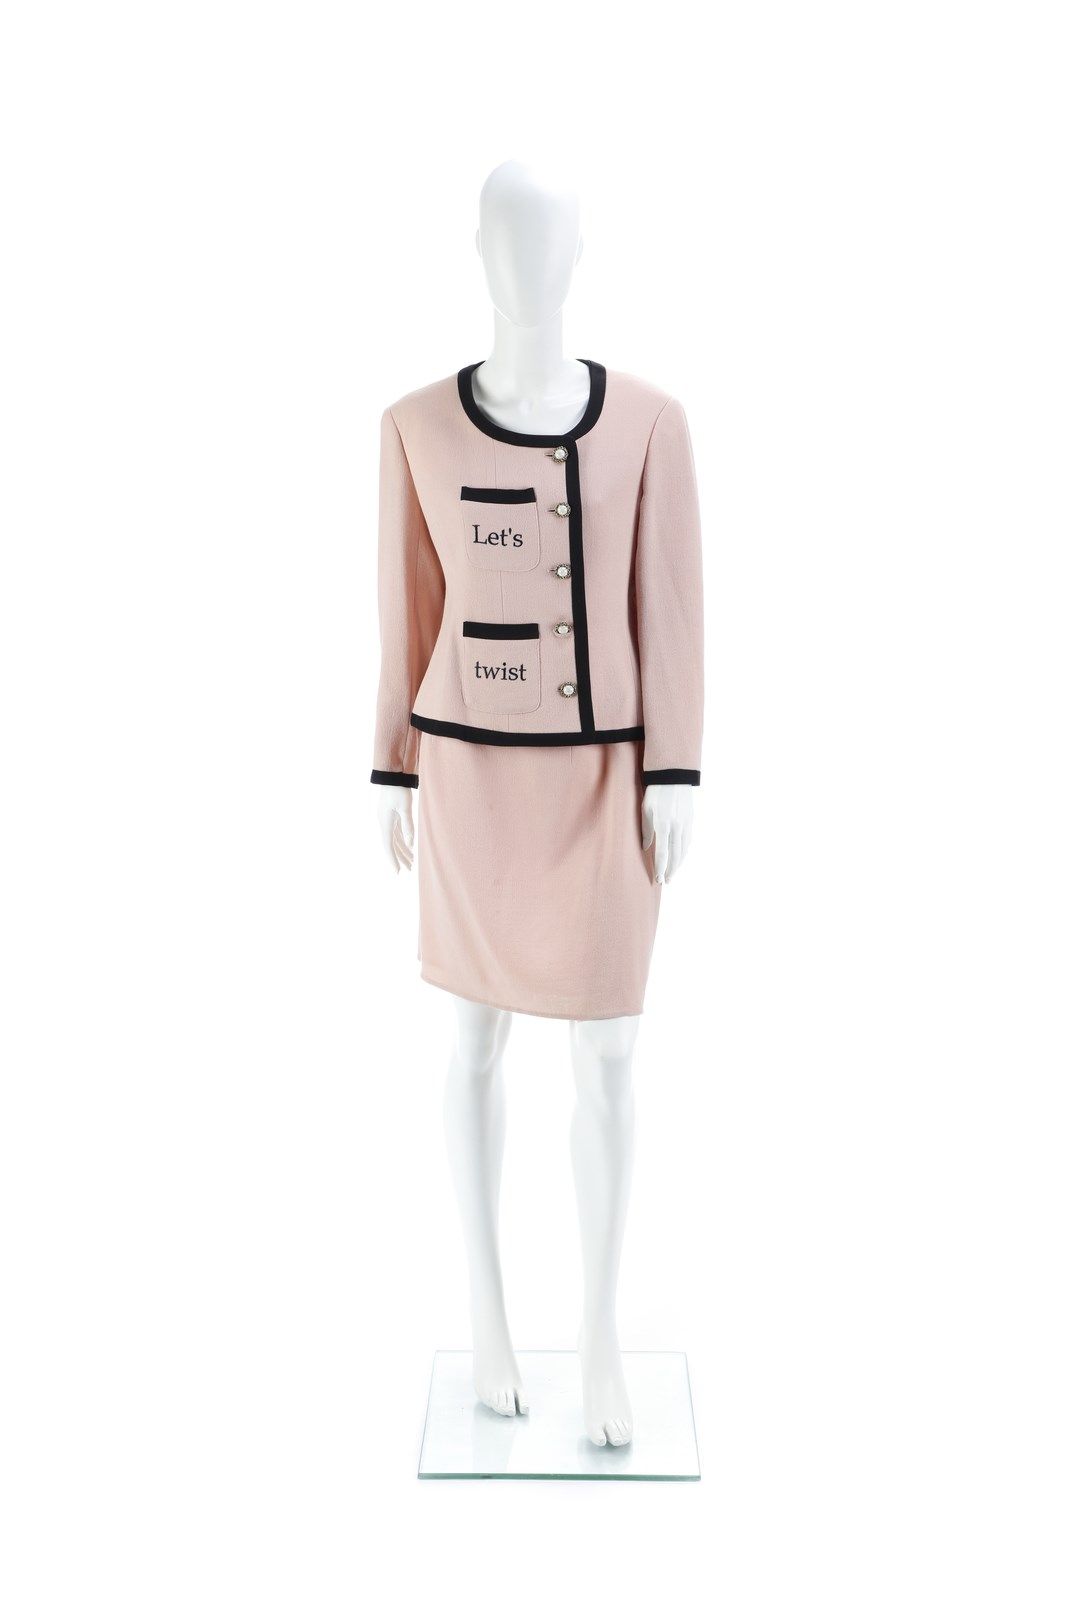 CHEAP AND CHIC BY MOSCHINO Suit in shades of pink, complete with skirt and "Let'&hellip;